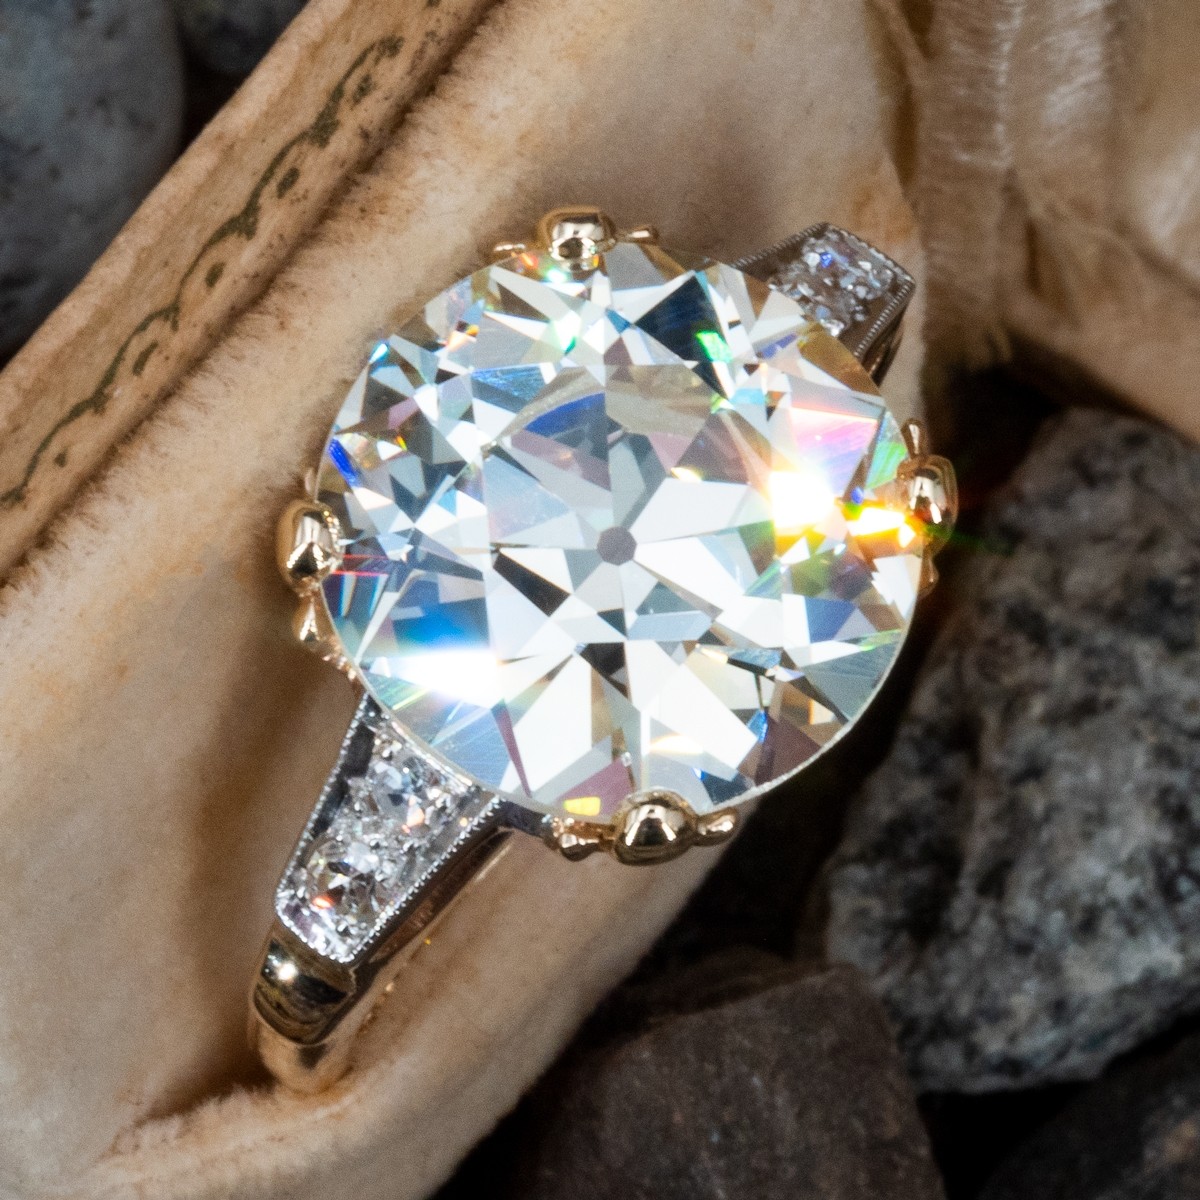 A beginner's guide to diamond clarity | The Jewellery Editor